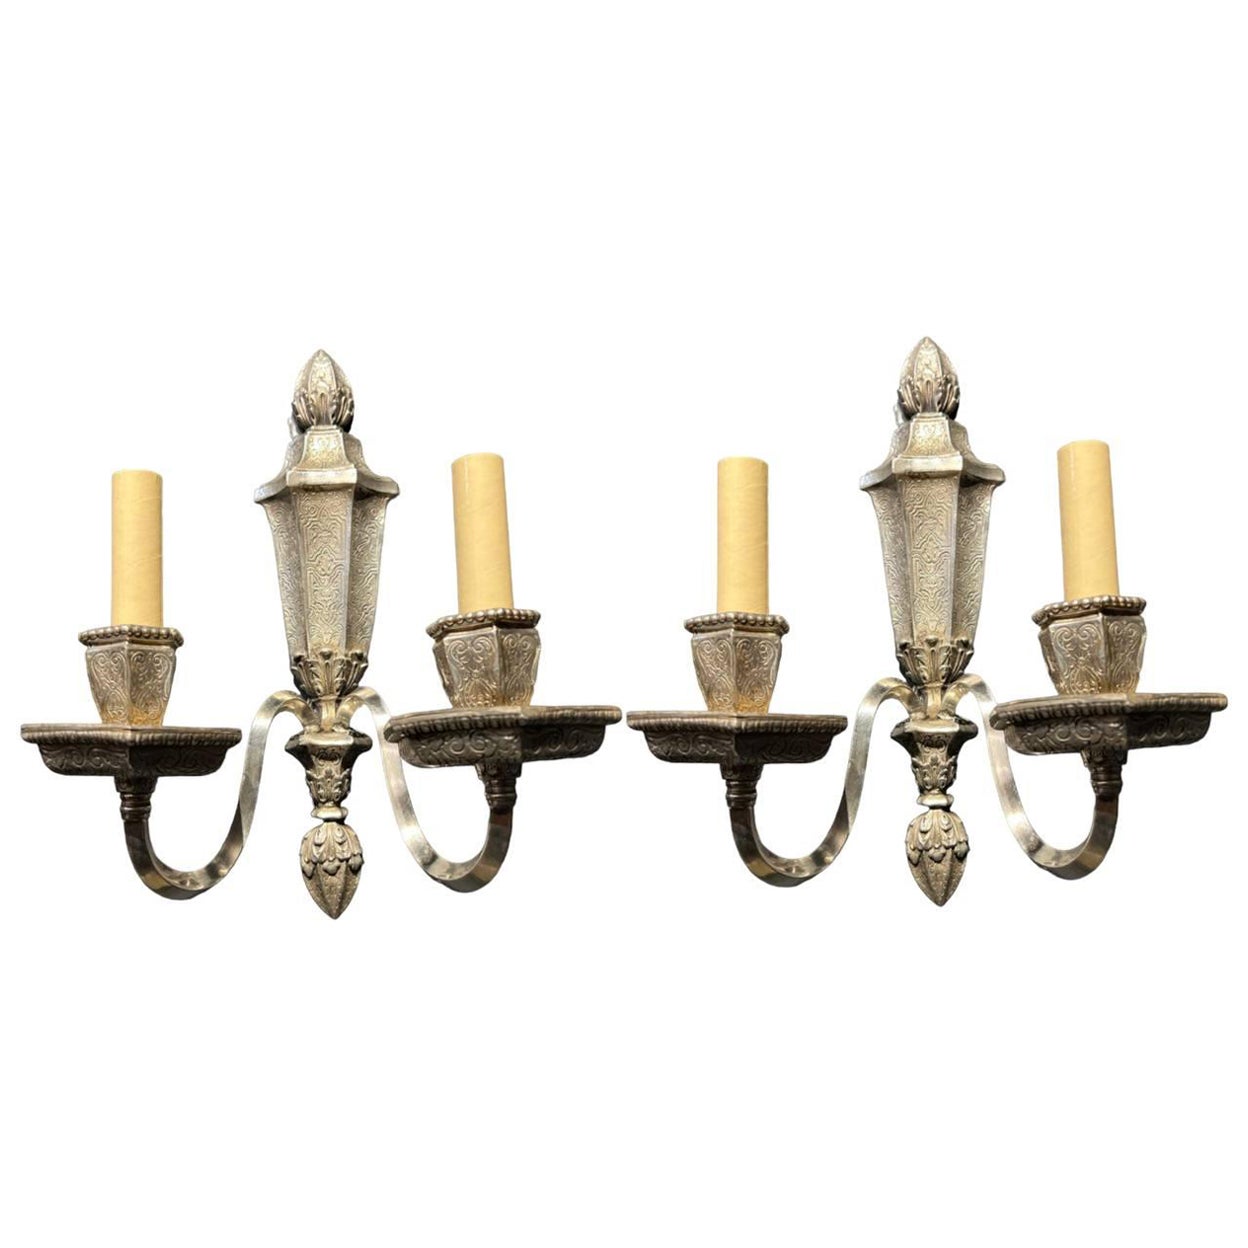 1920's Caldwell Engraved Silver Plated Sconces For Sale